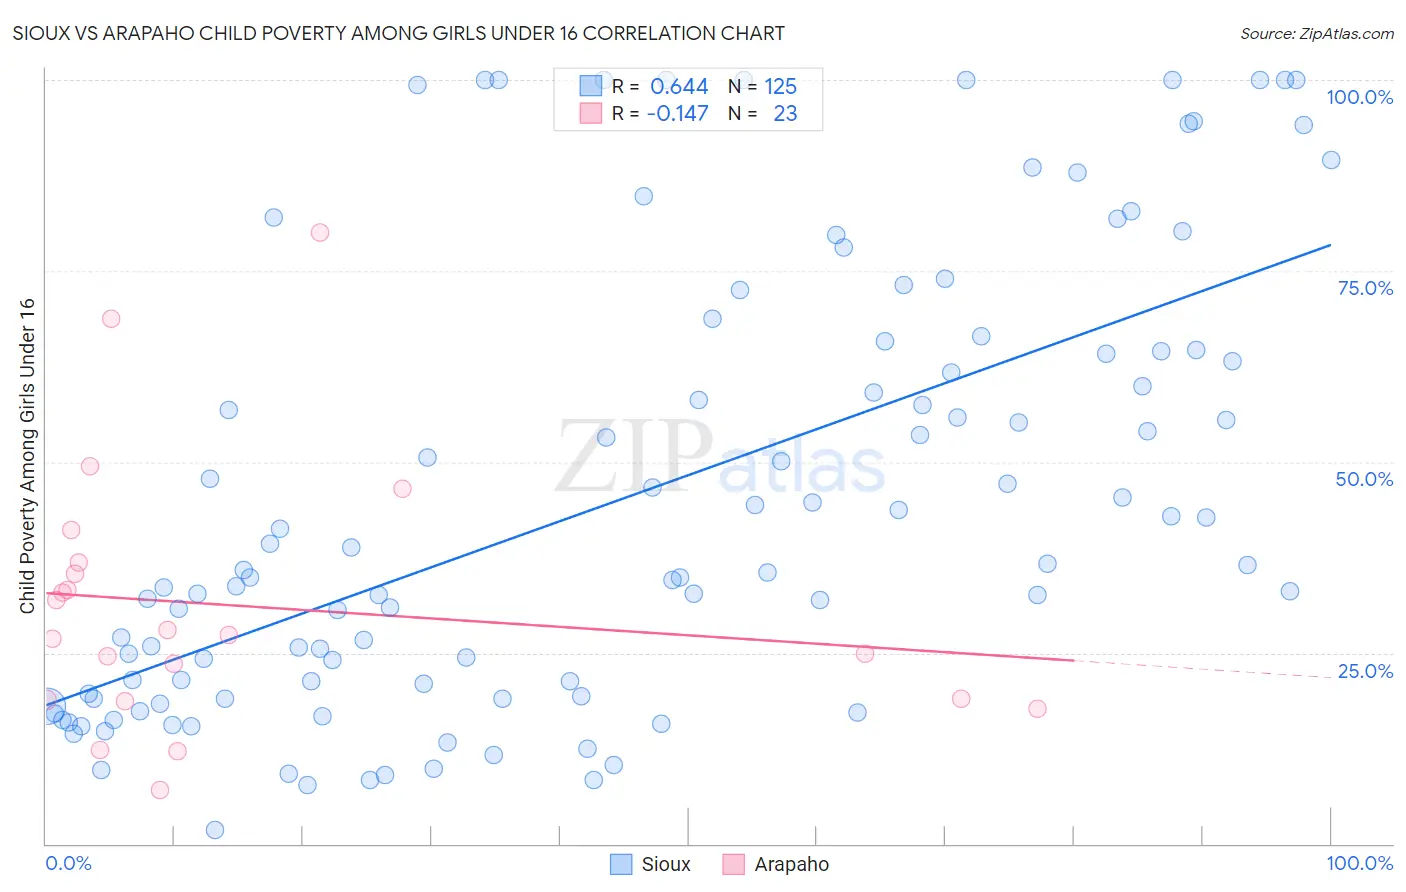 Sioux vs Arapaho Child Poverty Among Girls Under 16